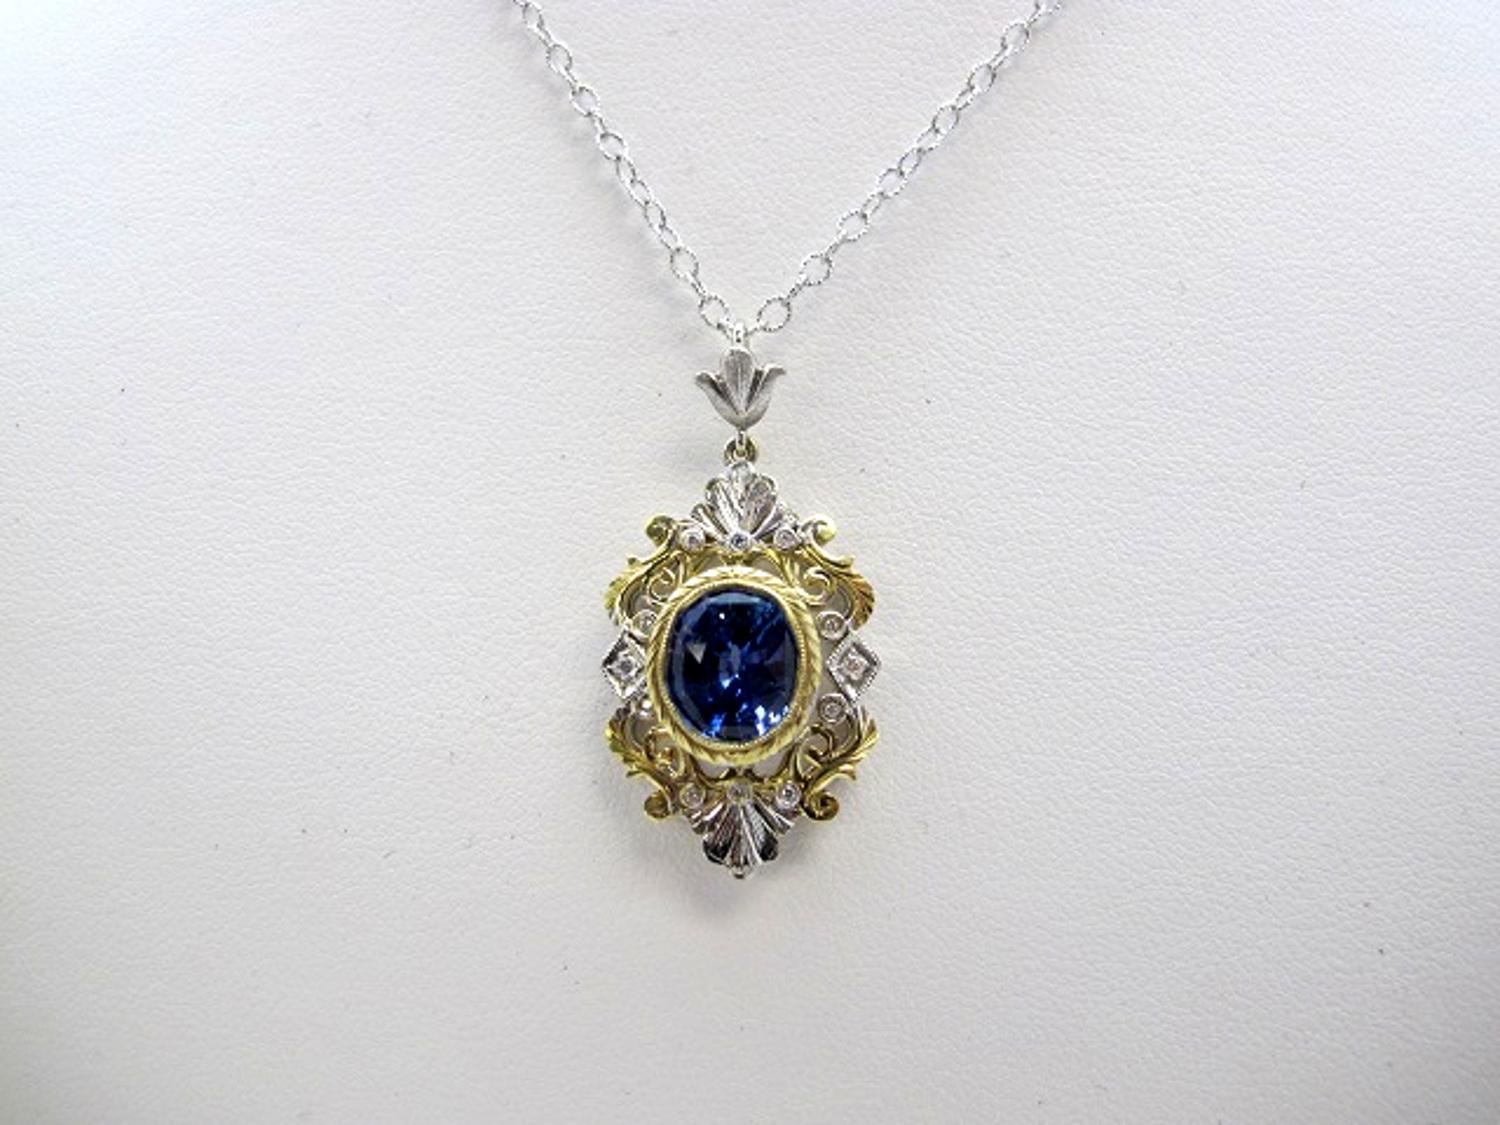 Feel like a royal in this regal pendant that shows your signature style! Ceylon Sapphire (9x8mm/2.29cts) is accented by eight brilliant cut Diamonds (0.16cts tw).

Handmade by our jewelers in Los Angeles.